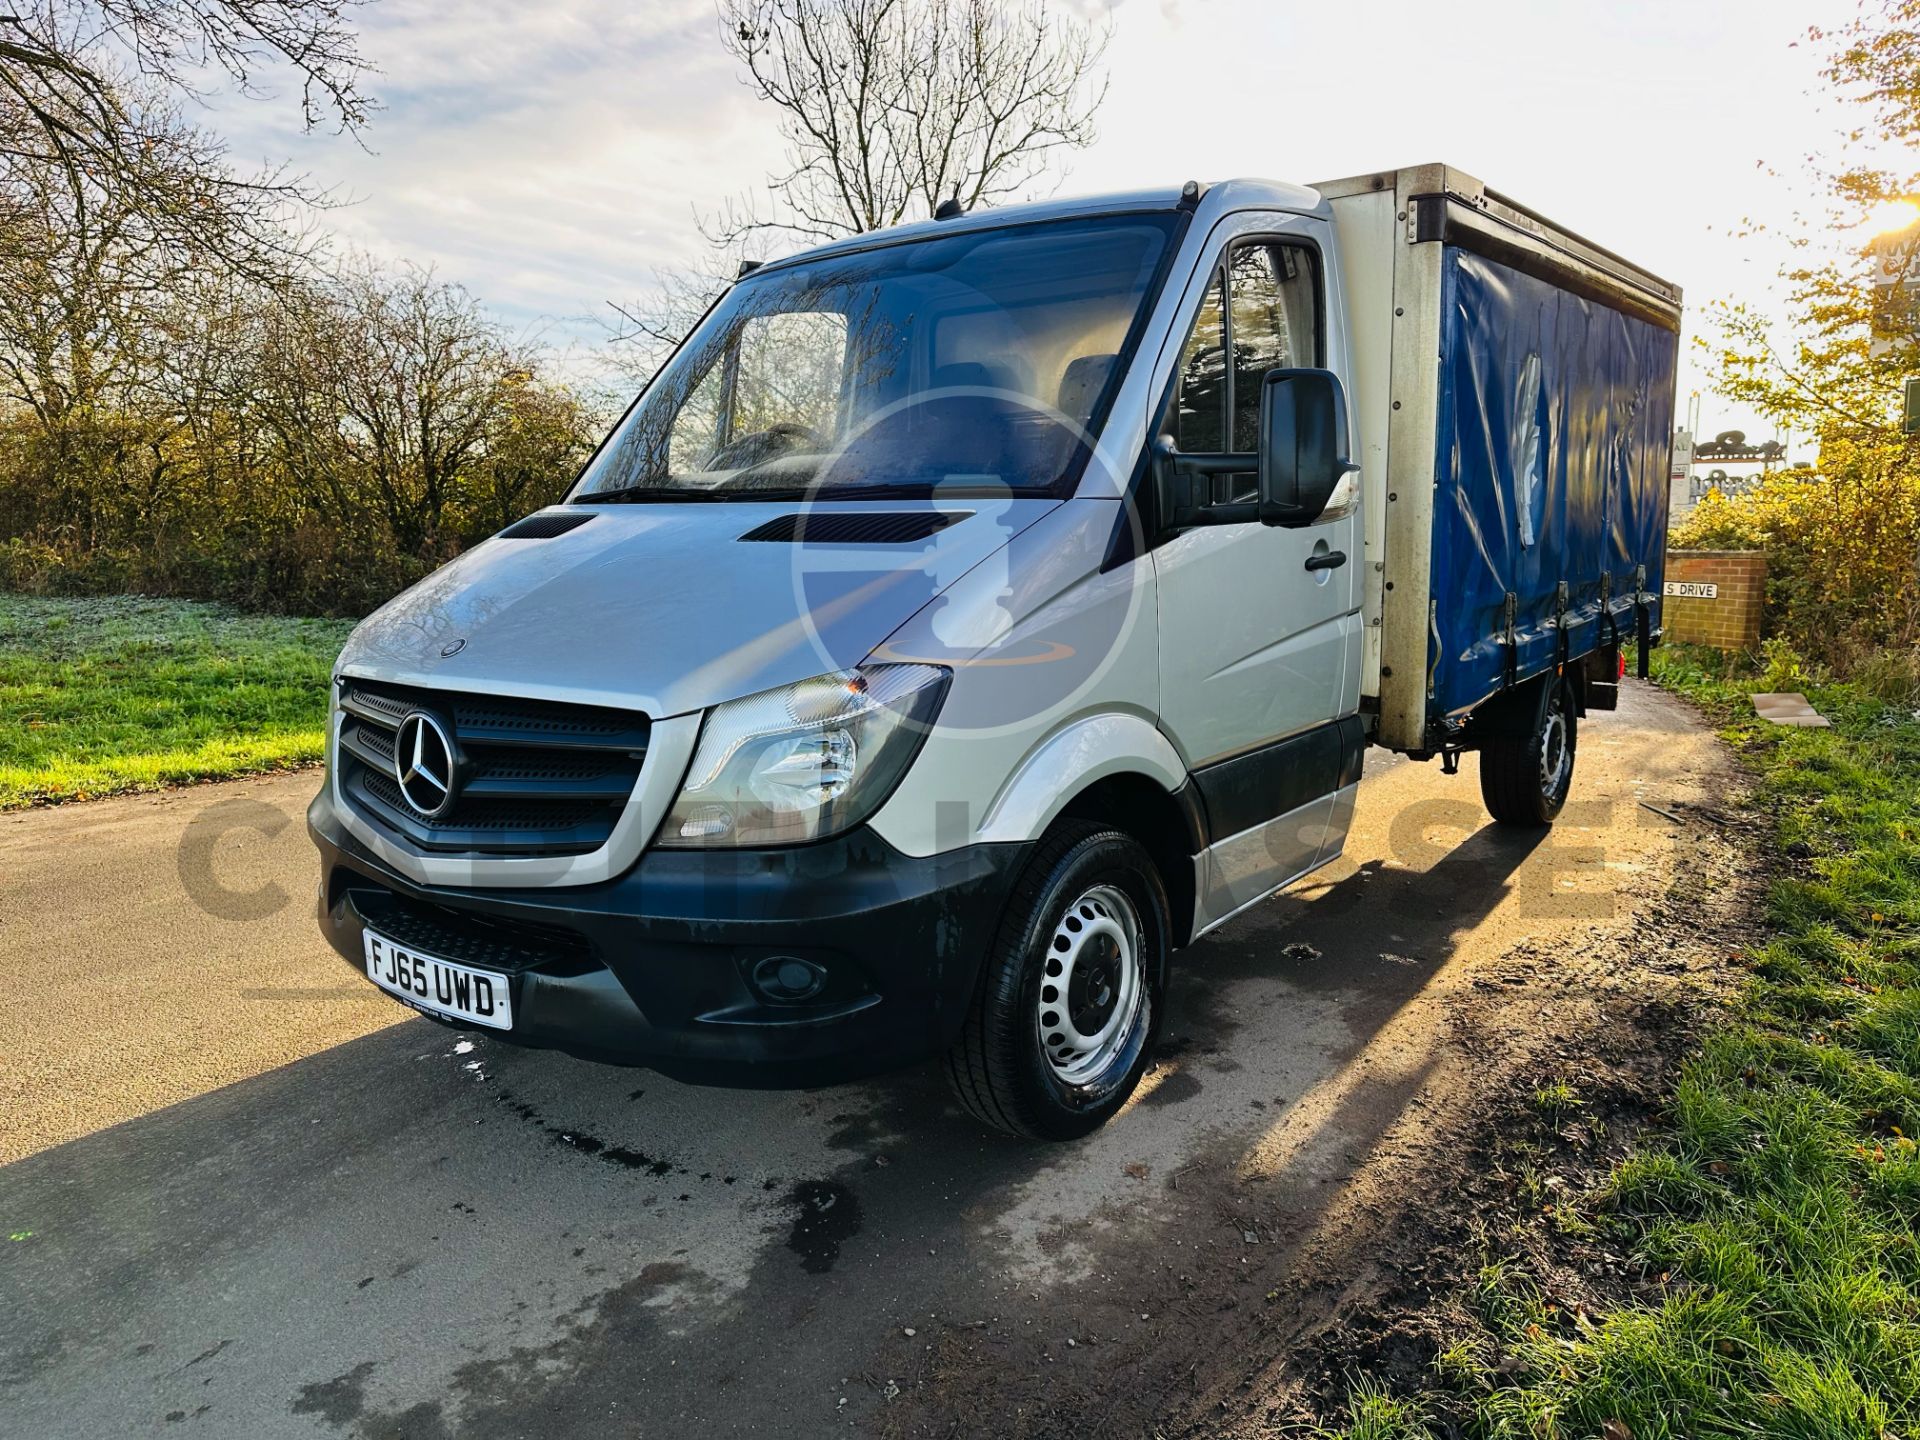 MERCEDES-BENZ SPRINTER 313 CDI - *LWB CURTAINSIDER TRUCK* - 2016 MODEL - 3 SEATER CABIN - AIR CON!!! - Image 4 of 26